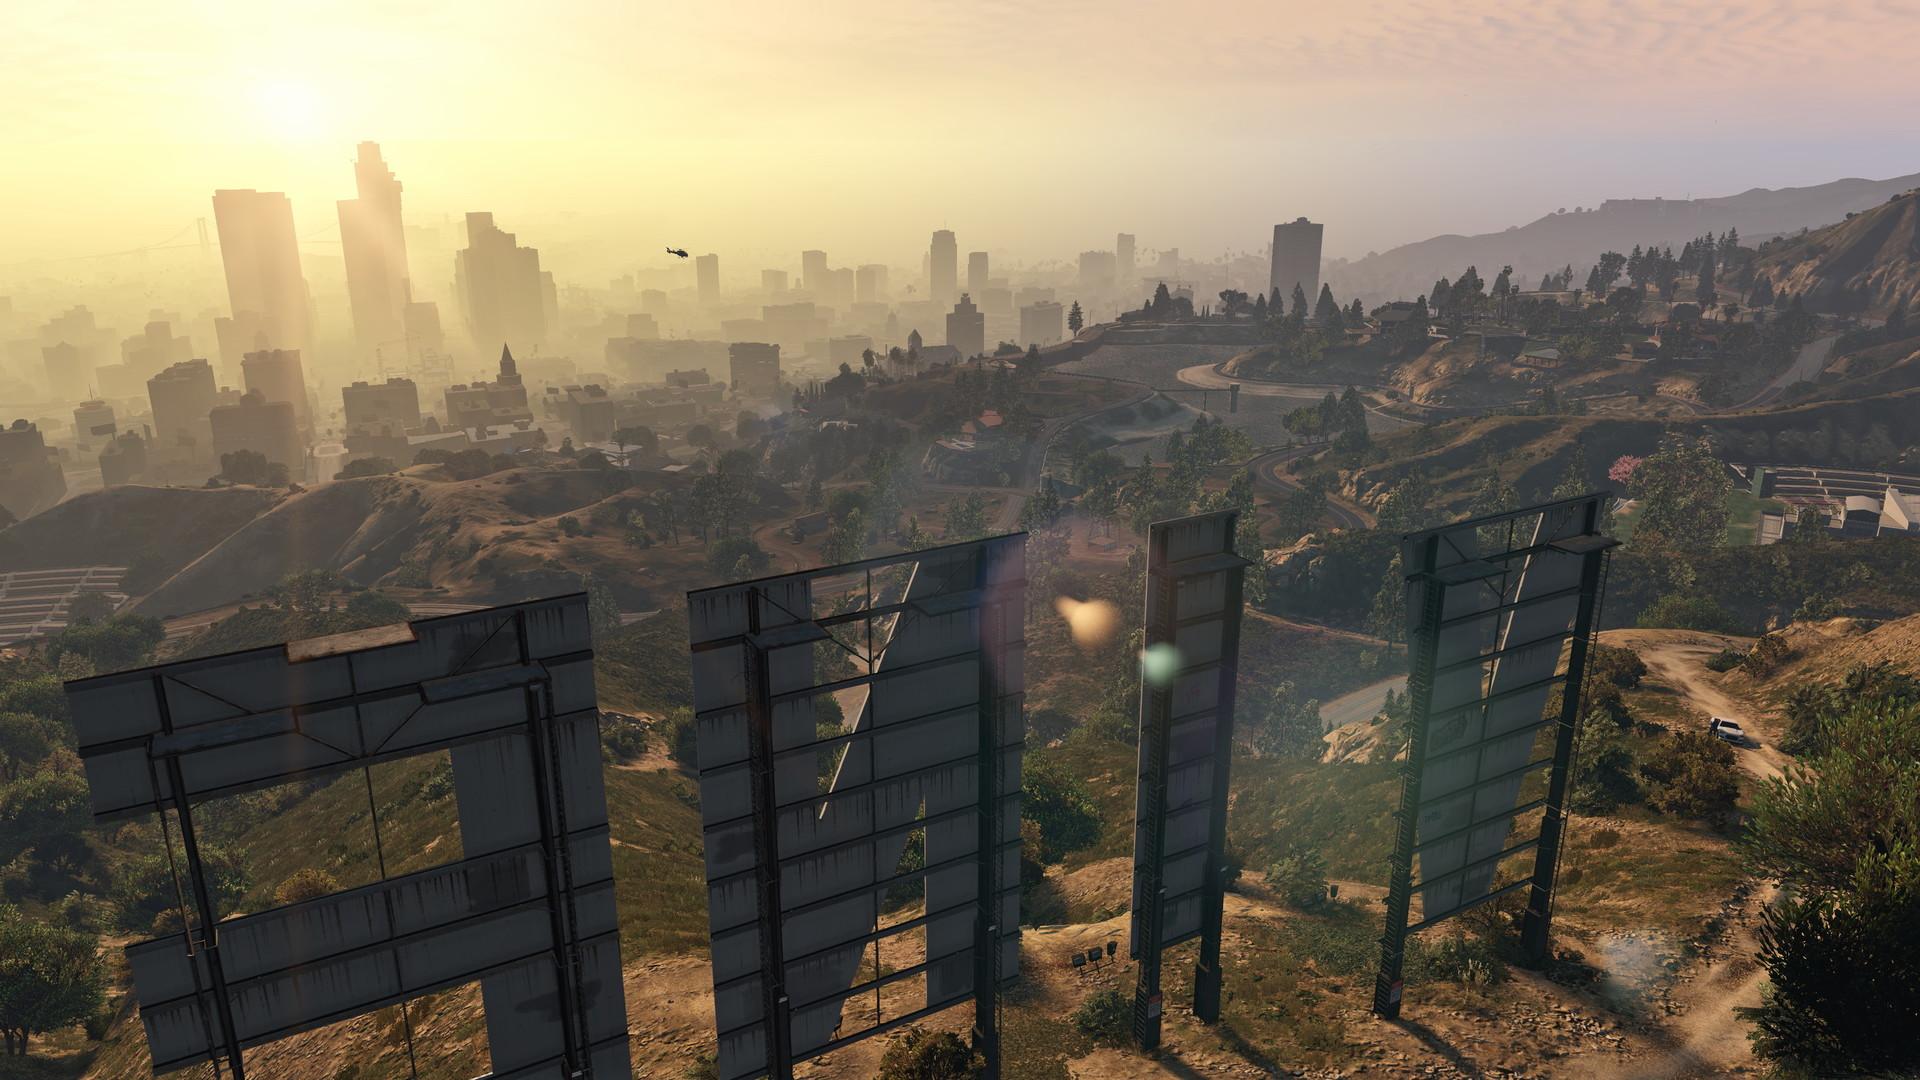 Screenshot №57 from game Grand Theft Auto V